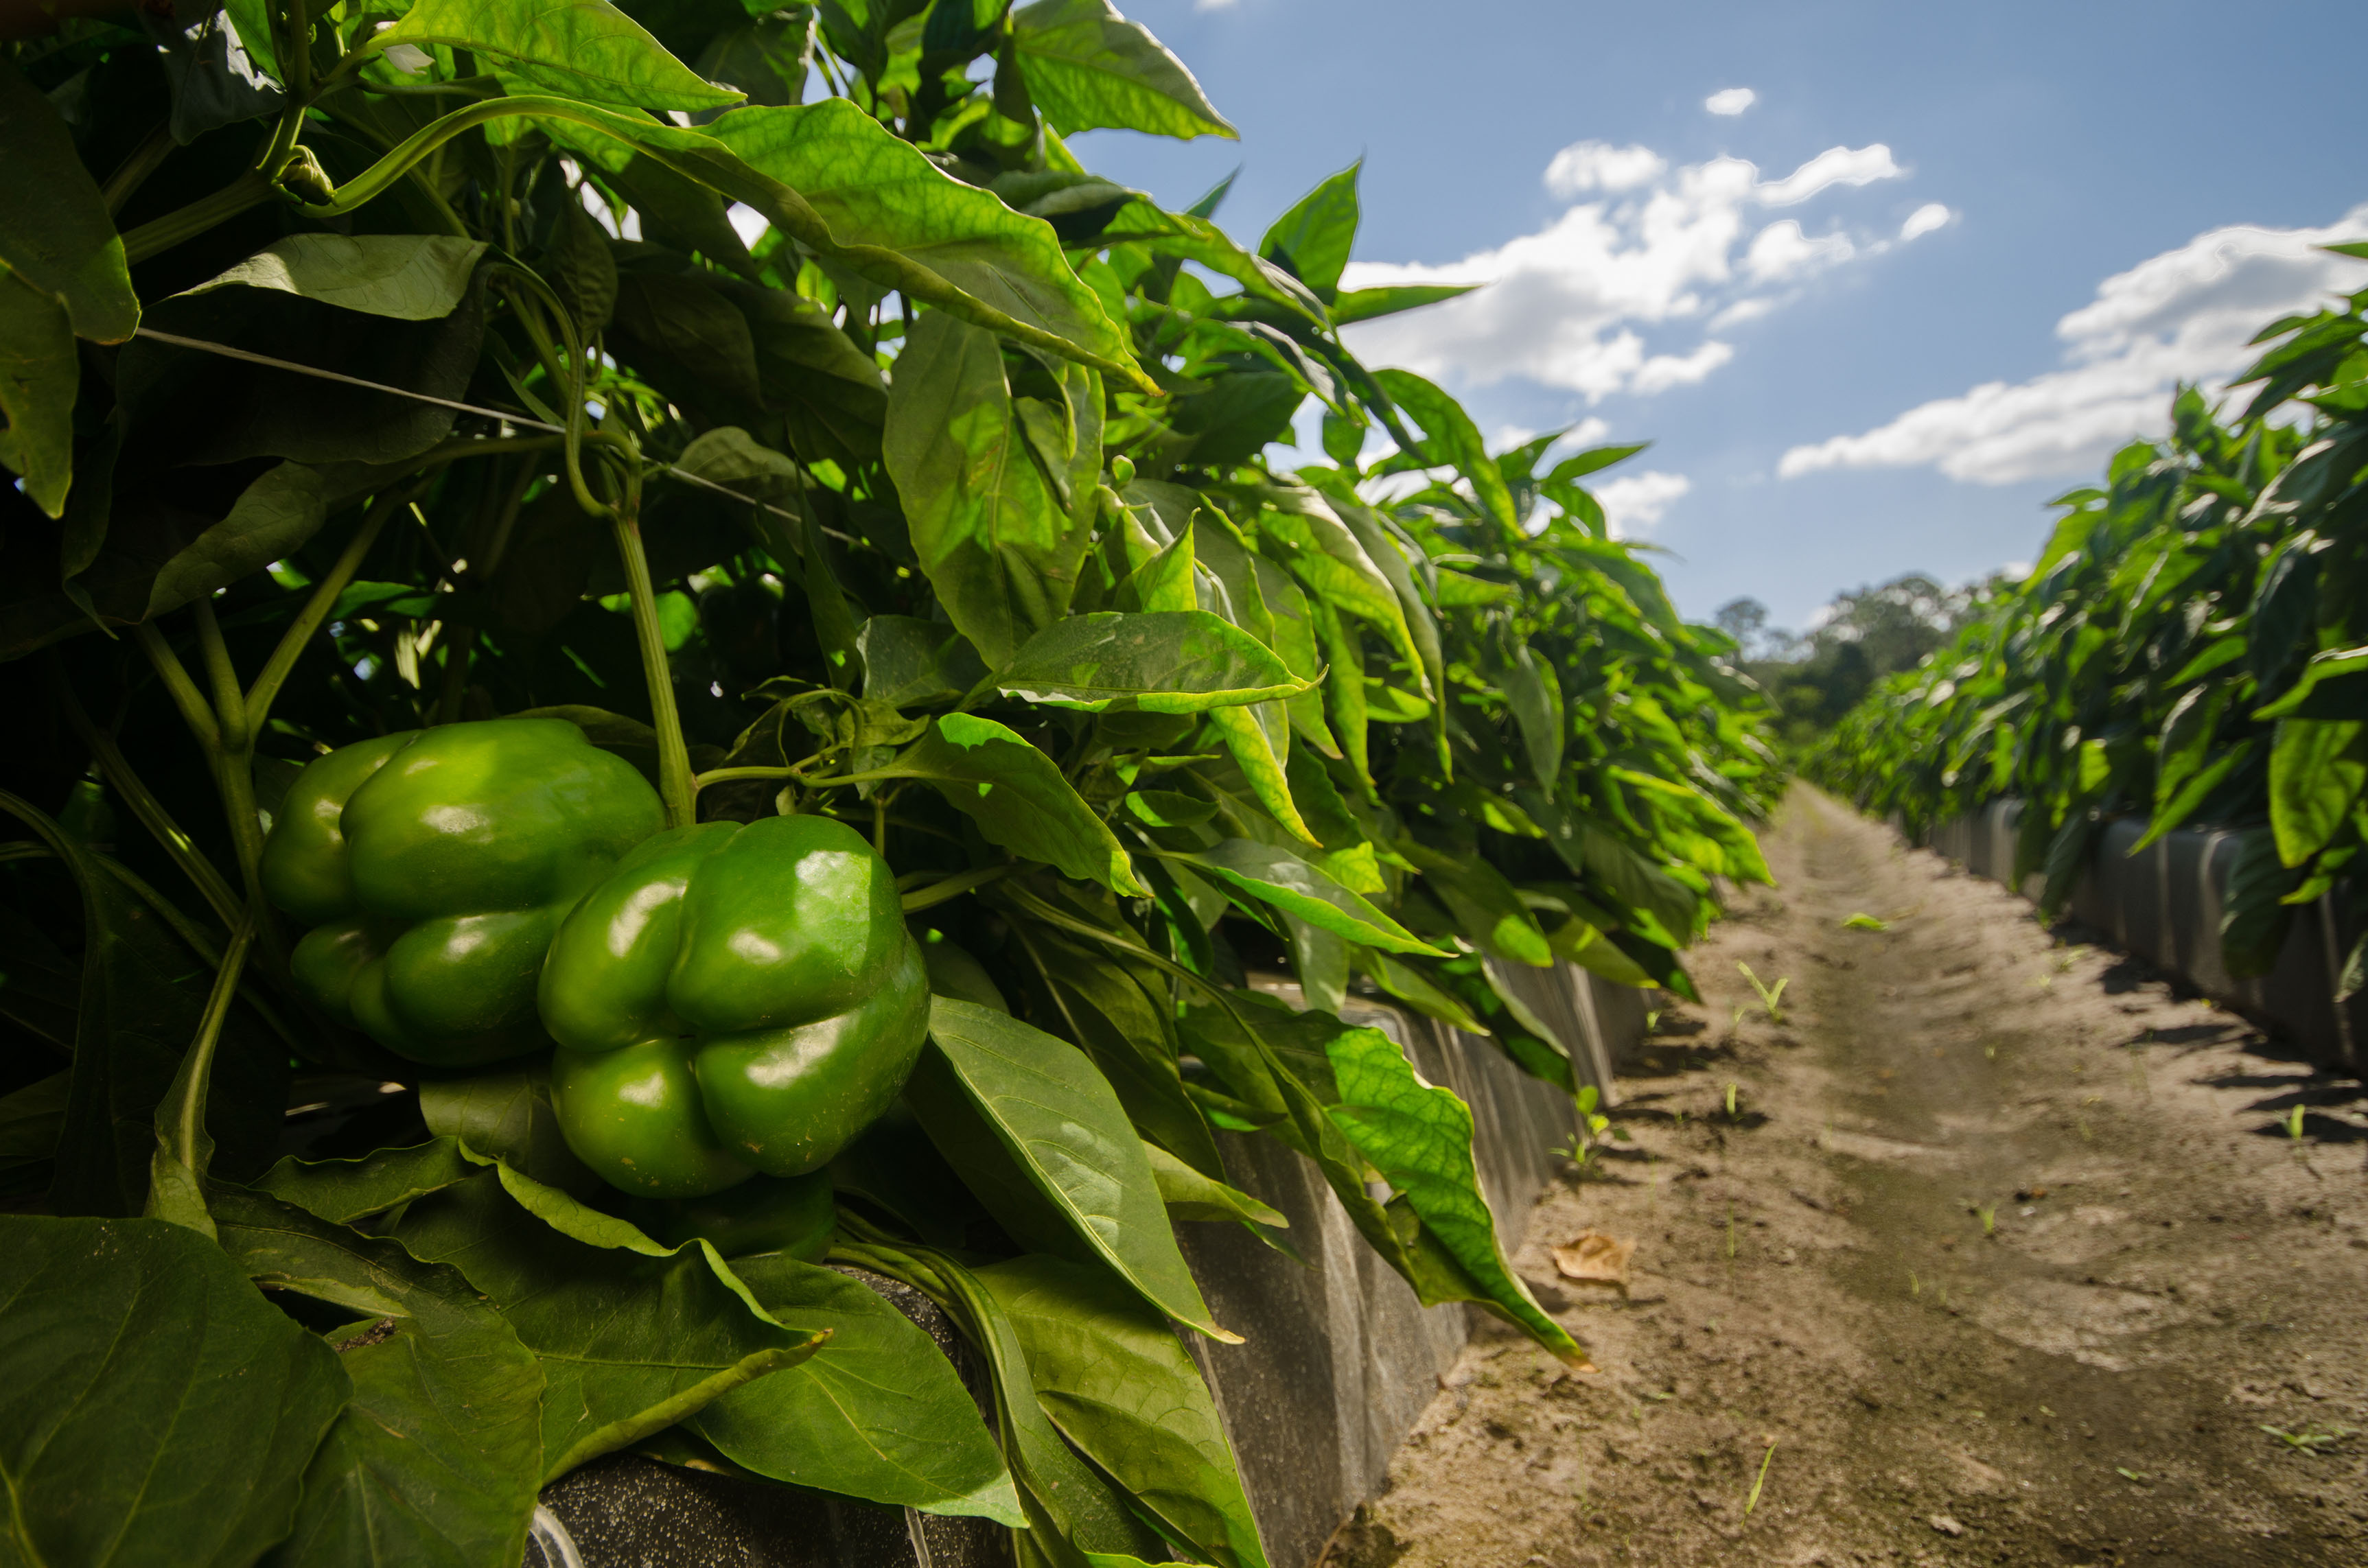 This agronomic image shows peppers